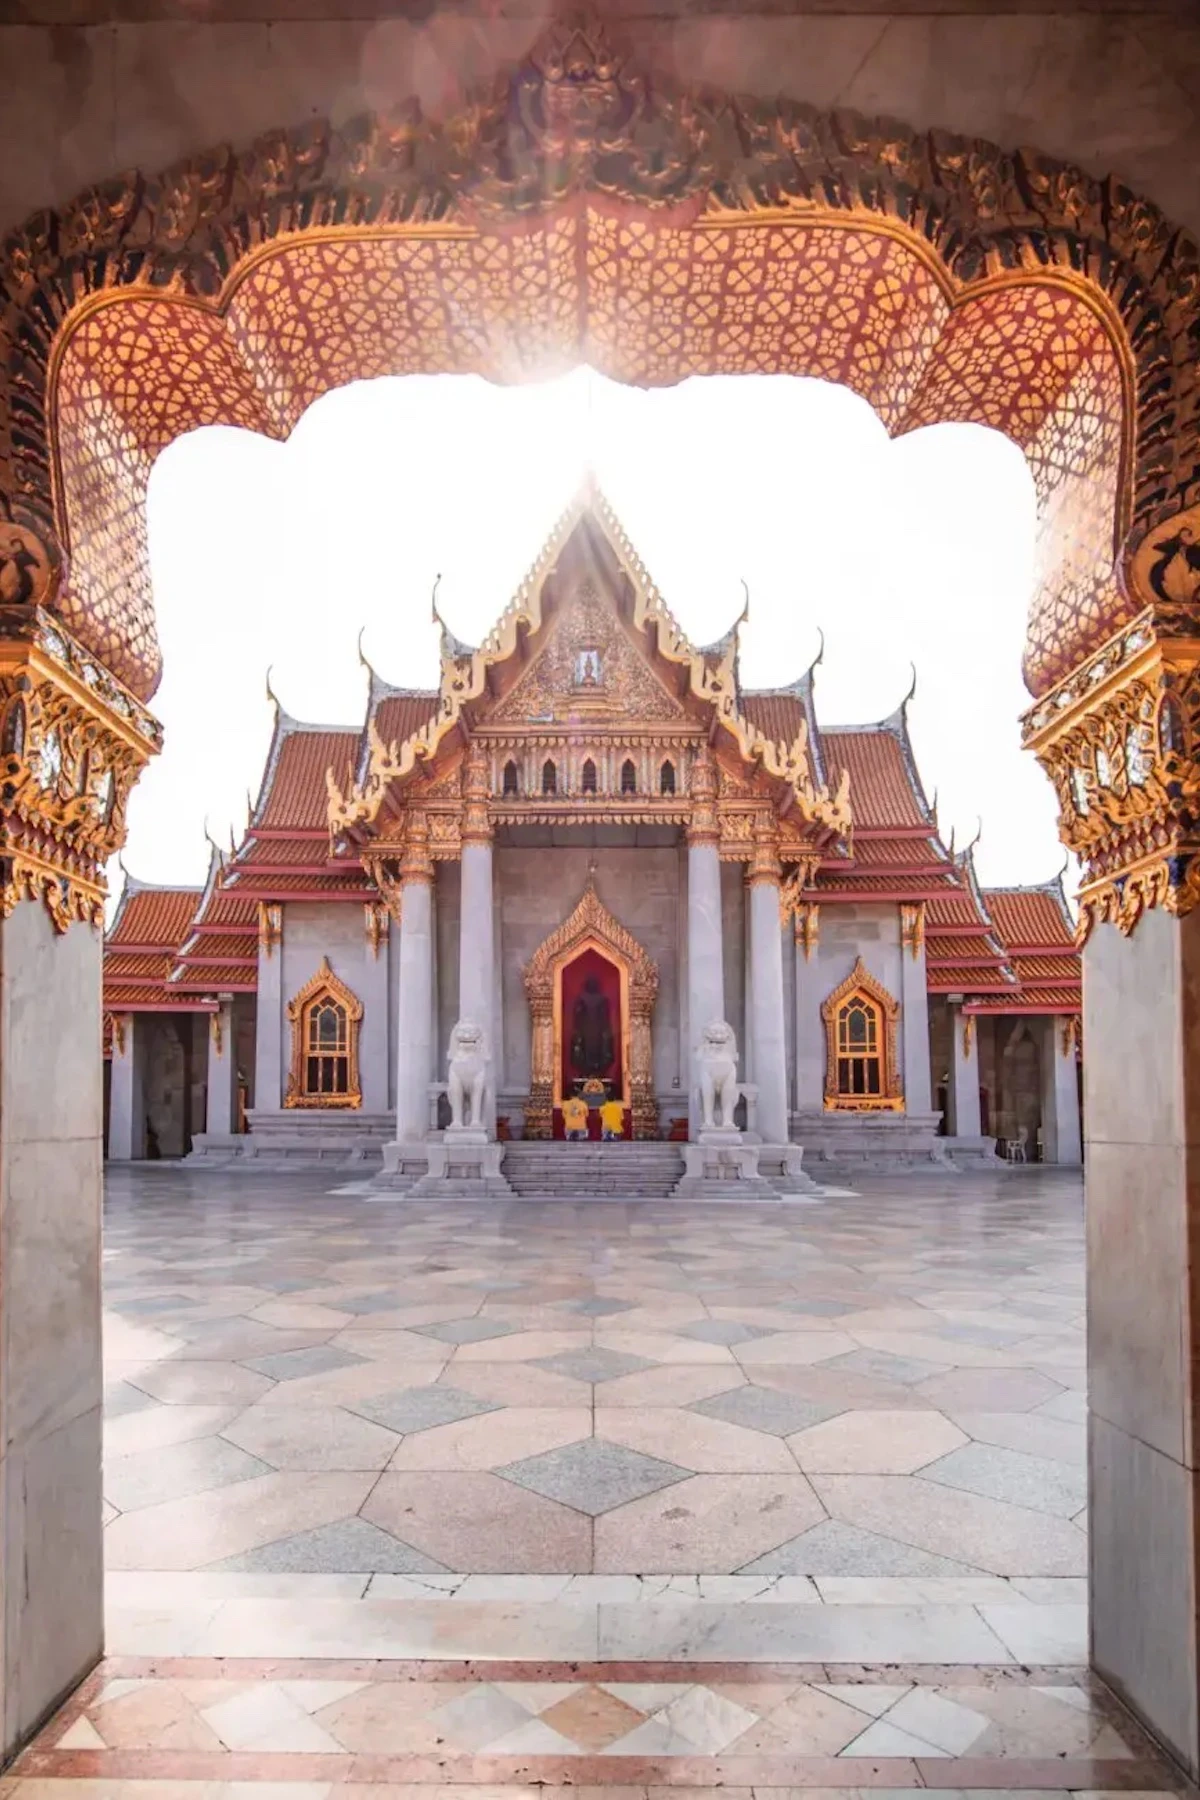 This one the entry of the main temple in The Grand Palace in Bangkok.